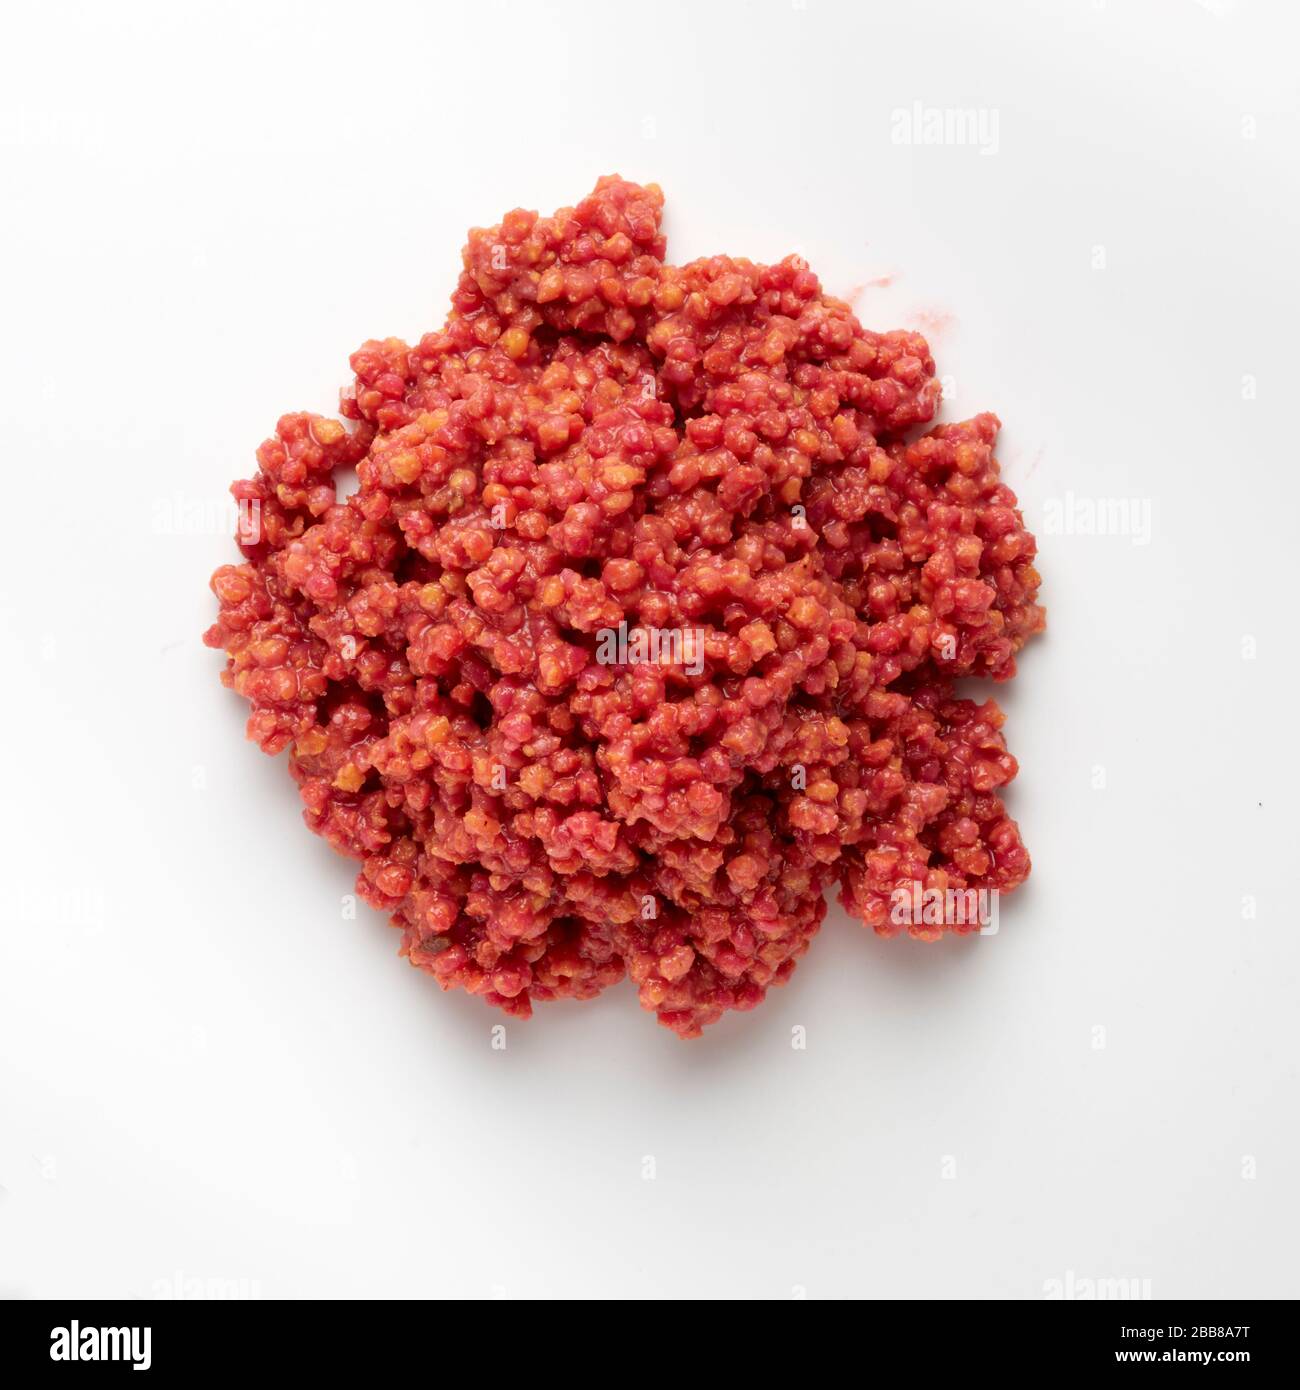 Millet beet beetroot nutritious nutrition healthy portion food prepared sample vegetable round Stock Photo